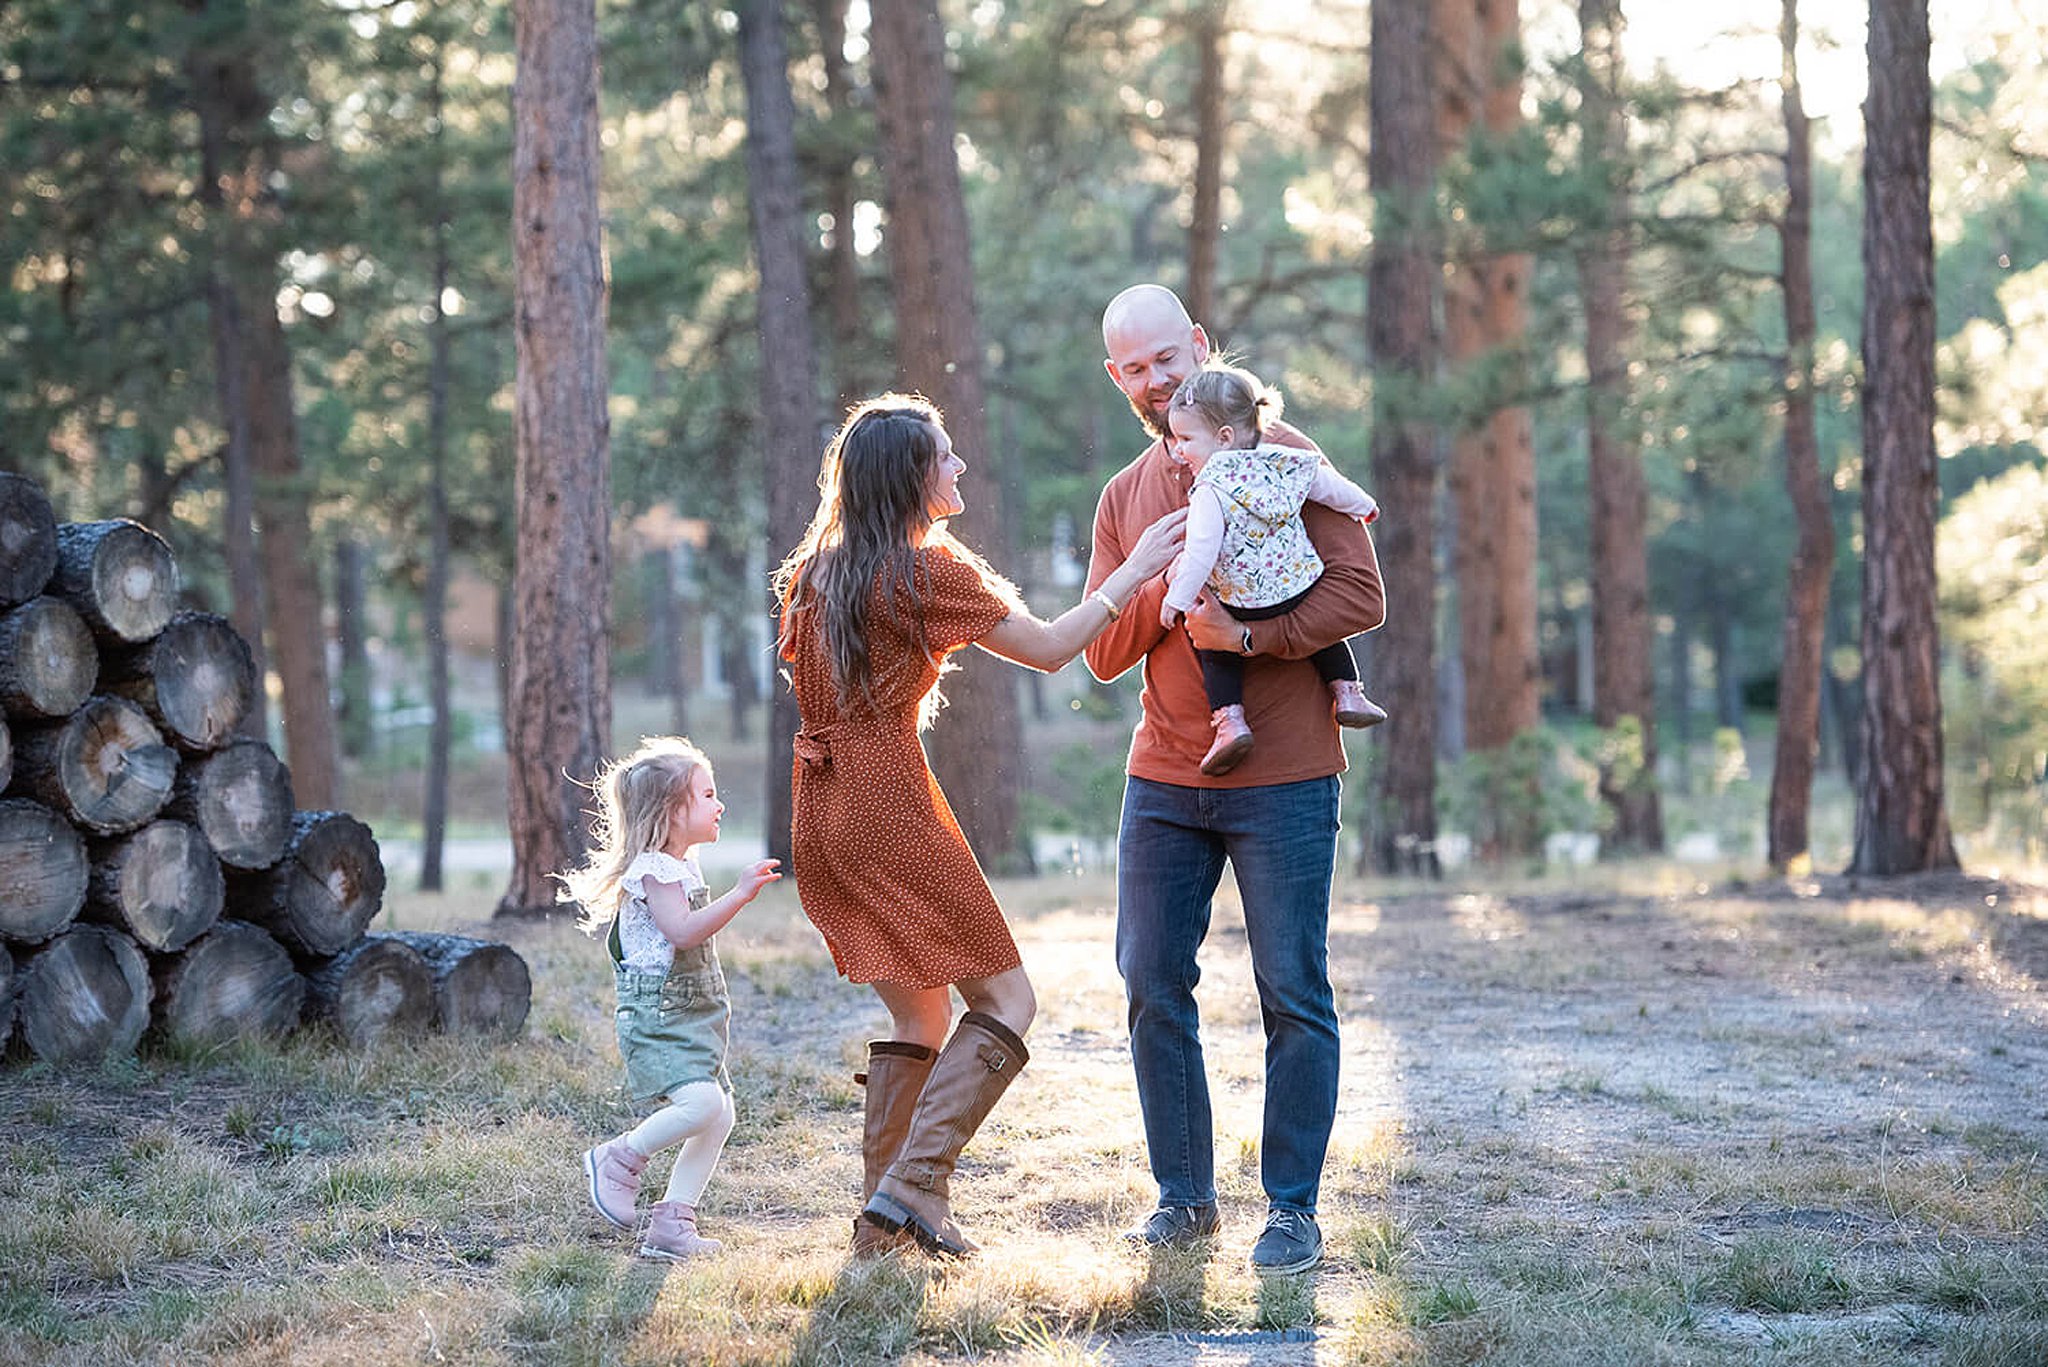 A mom and dad play with their two toddler daughters in a forest at sunset